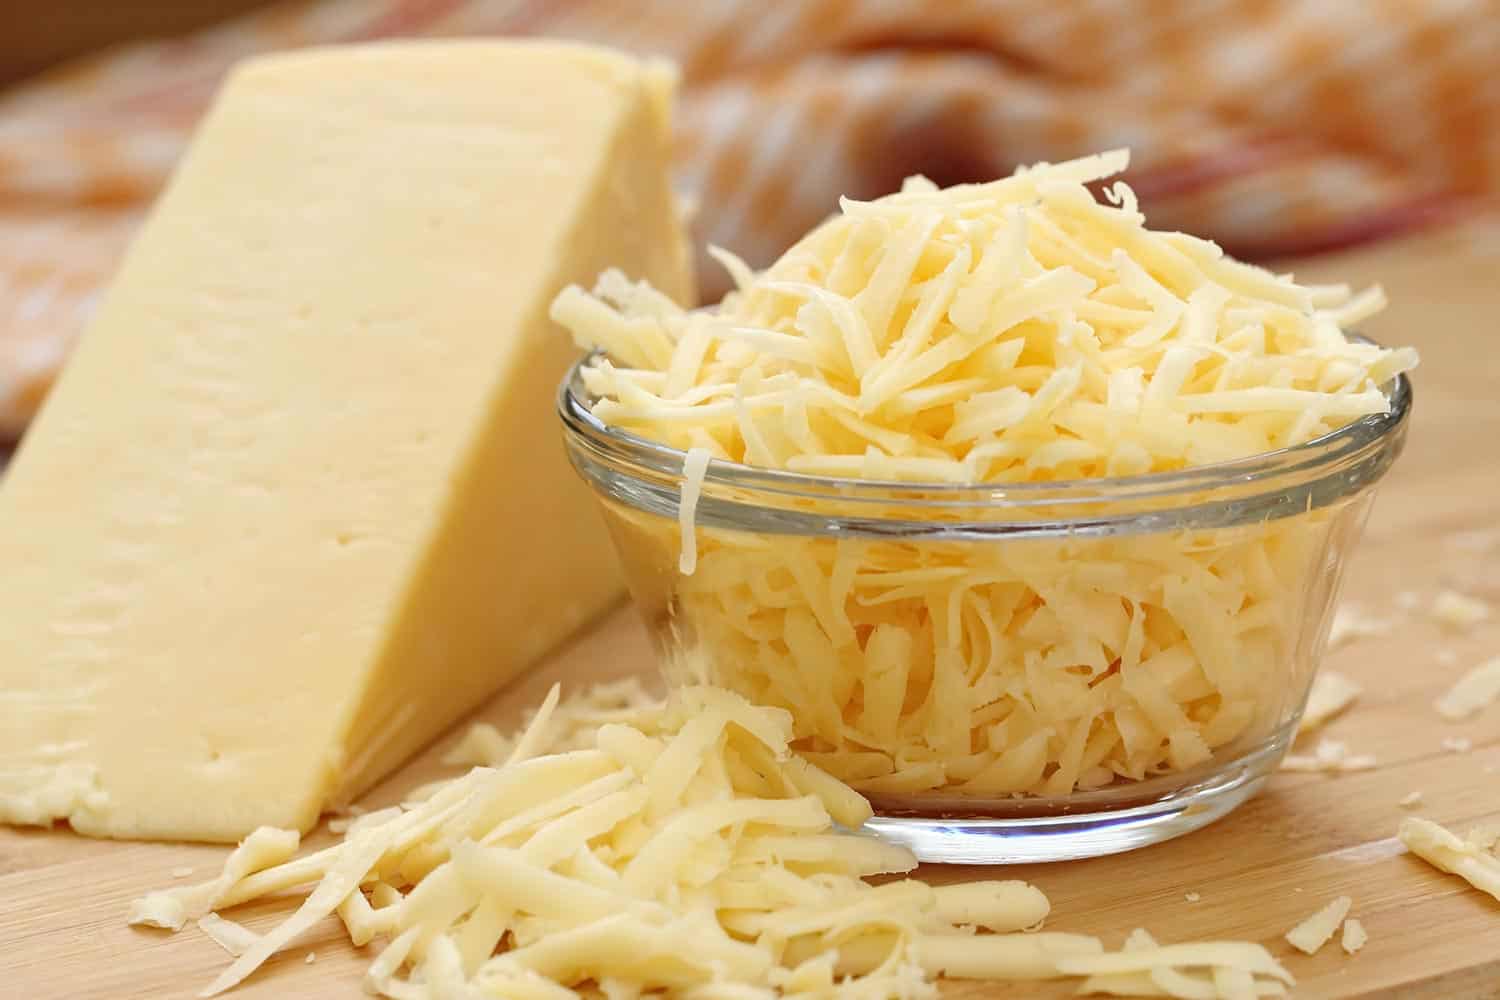 Grated cheese in a glass bowl